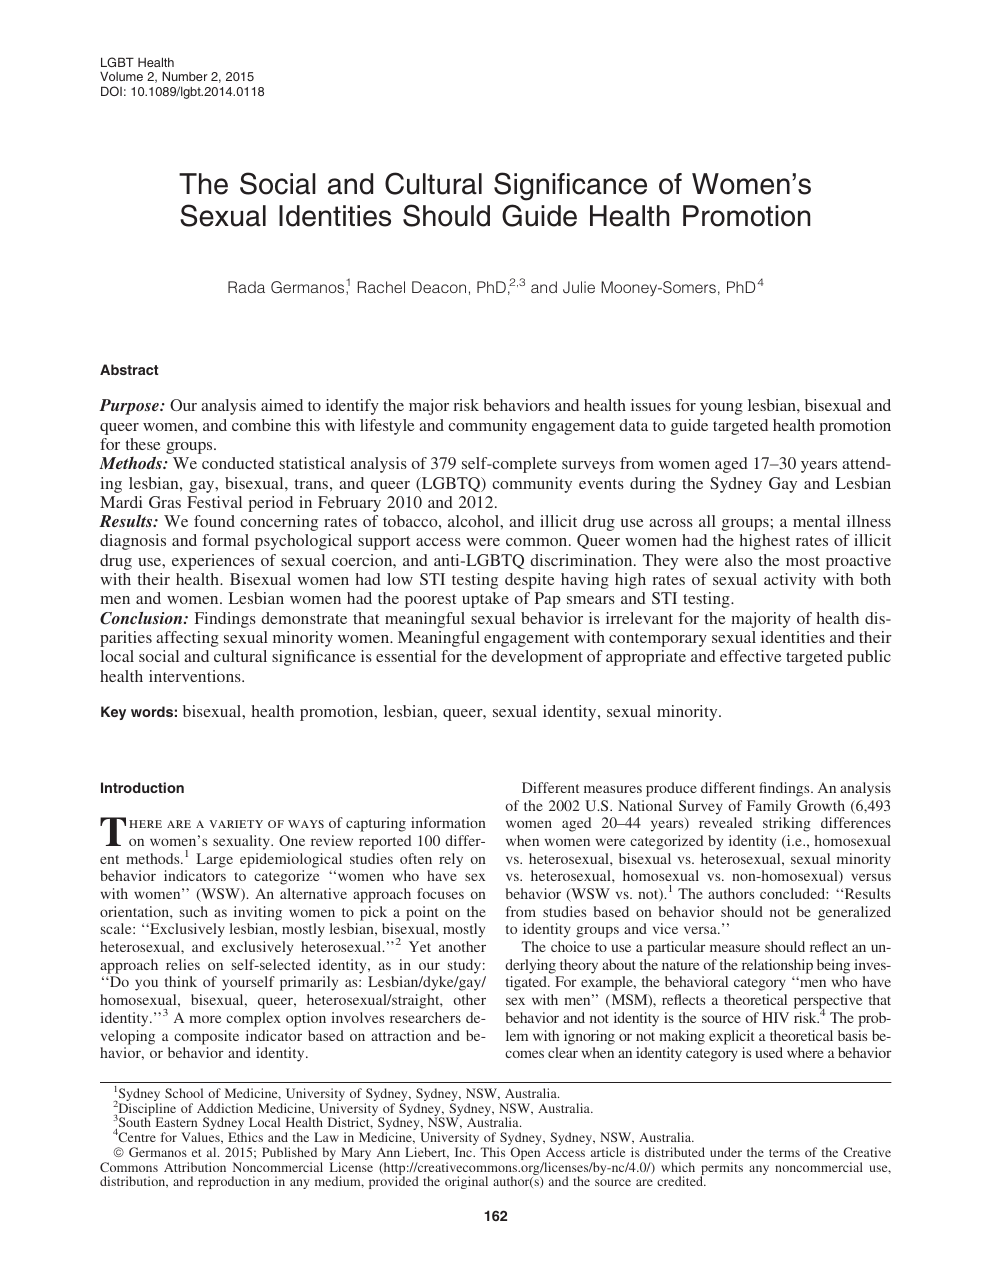 The Social and Cultural Significance of Womens Sexual Identities Should Guide Health Promotion pic